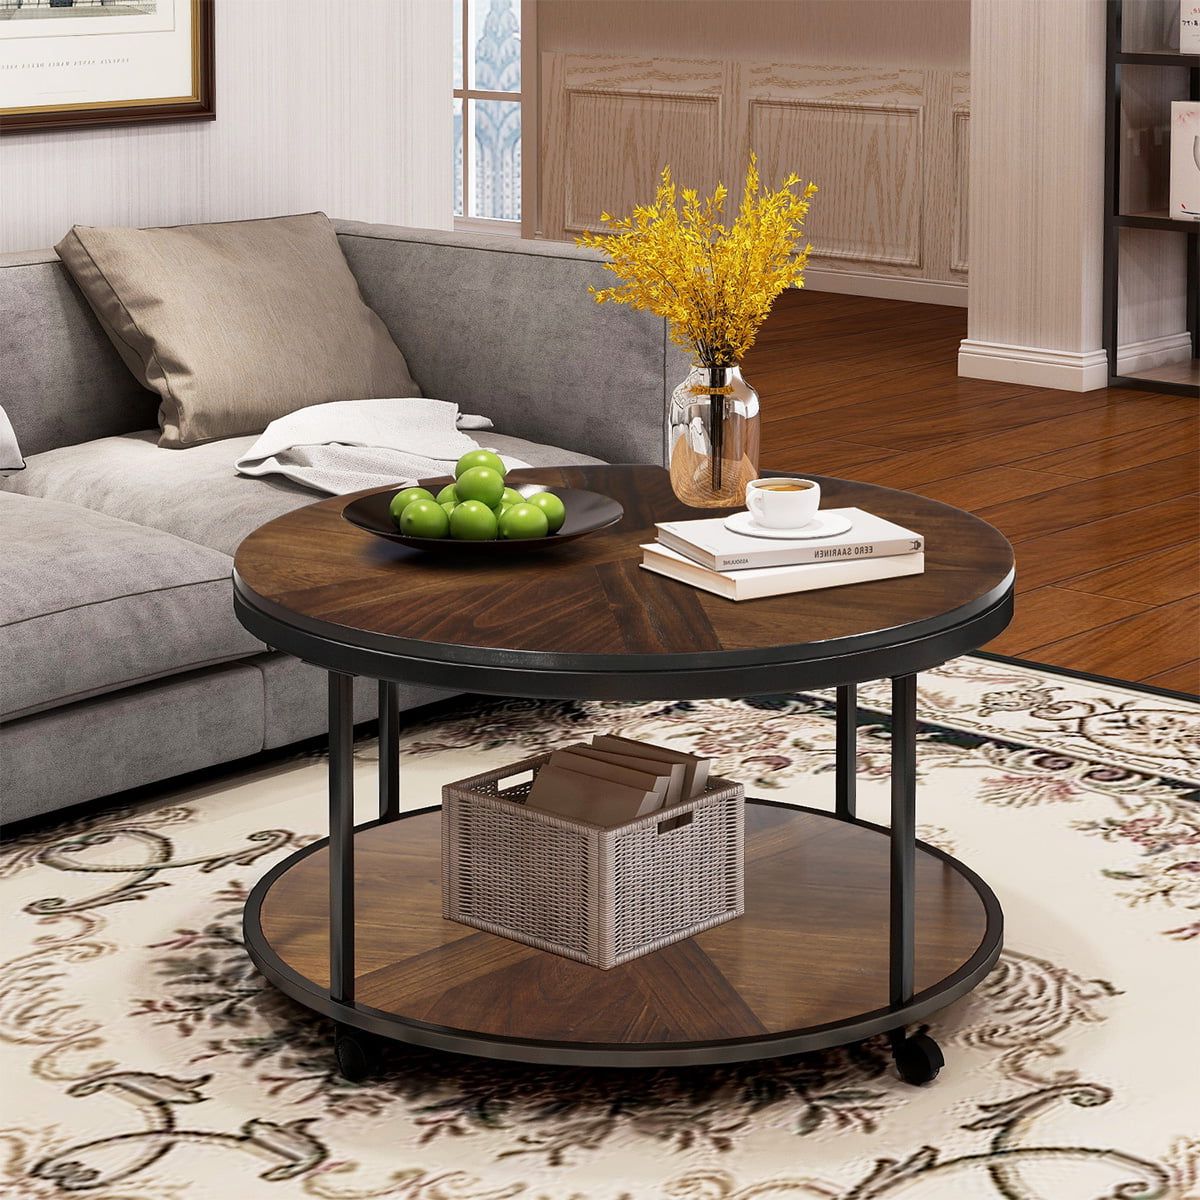 Sentern Round Coffee Table With Caster Wheels And Unique Textured Within Coffee Tables With Casters (View 2 of 20)